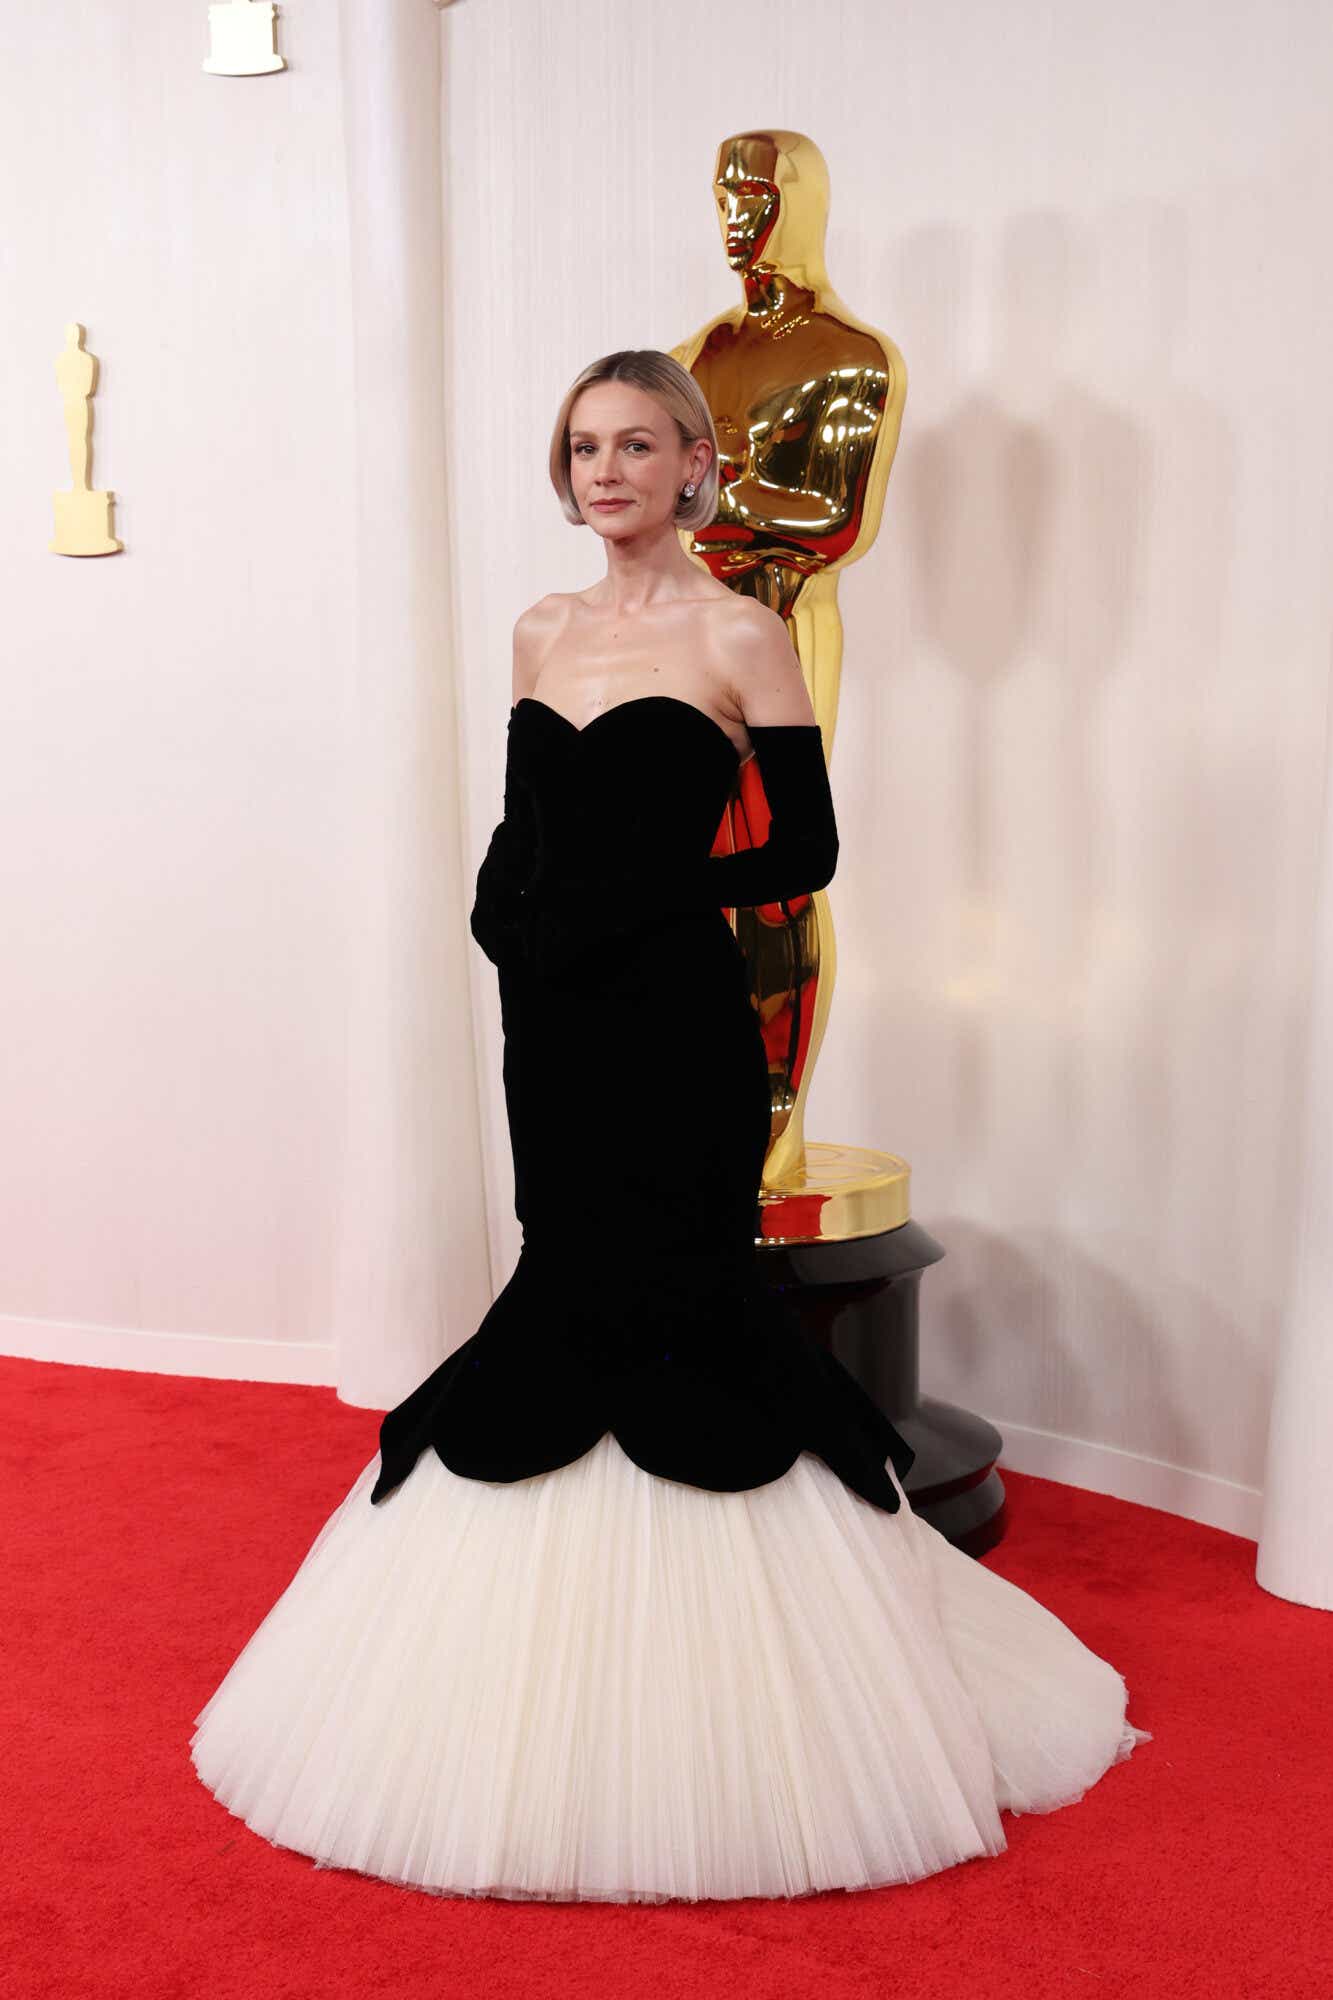 Carey Mulligan arrives at the Oscars weraing a strapless black trumpet gown with a white tulle skirt and matching black gloves.